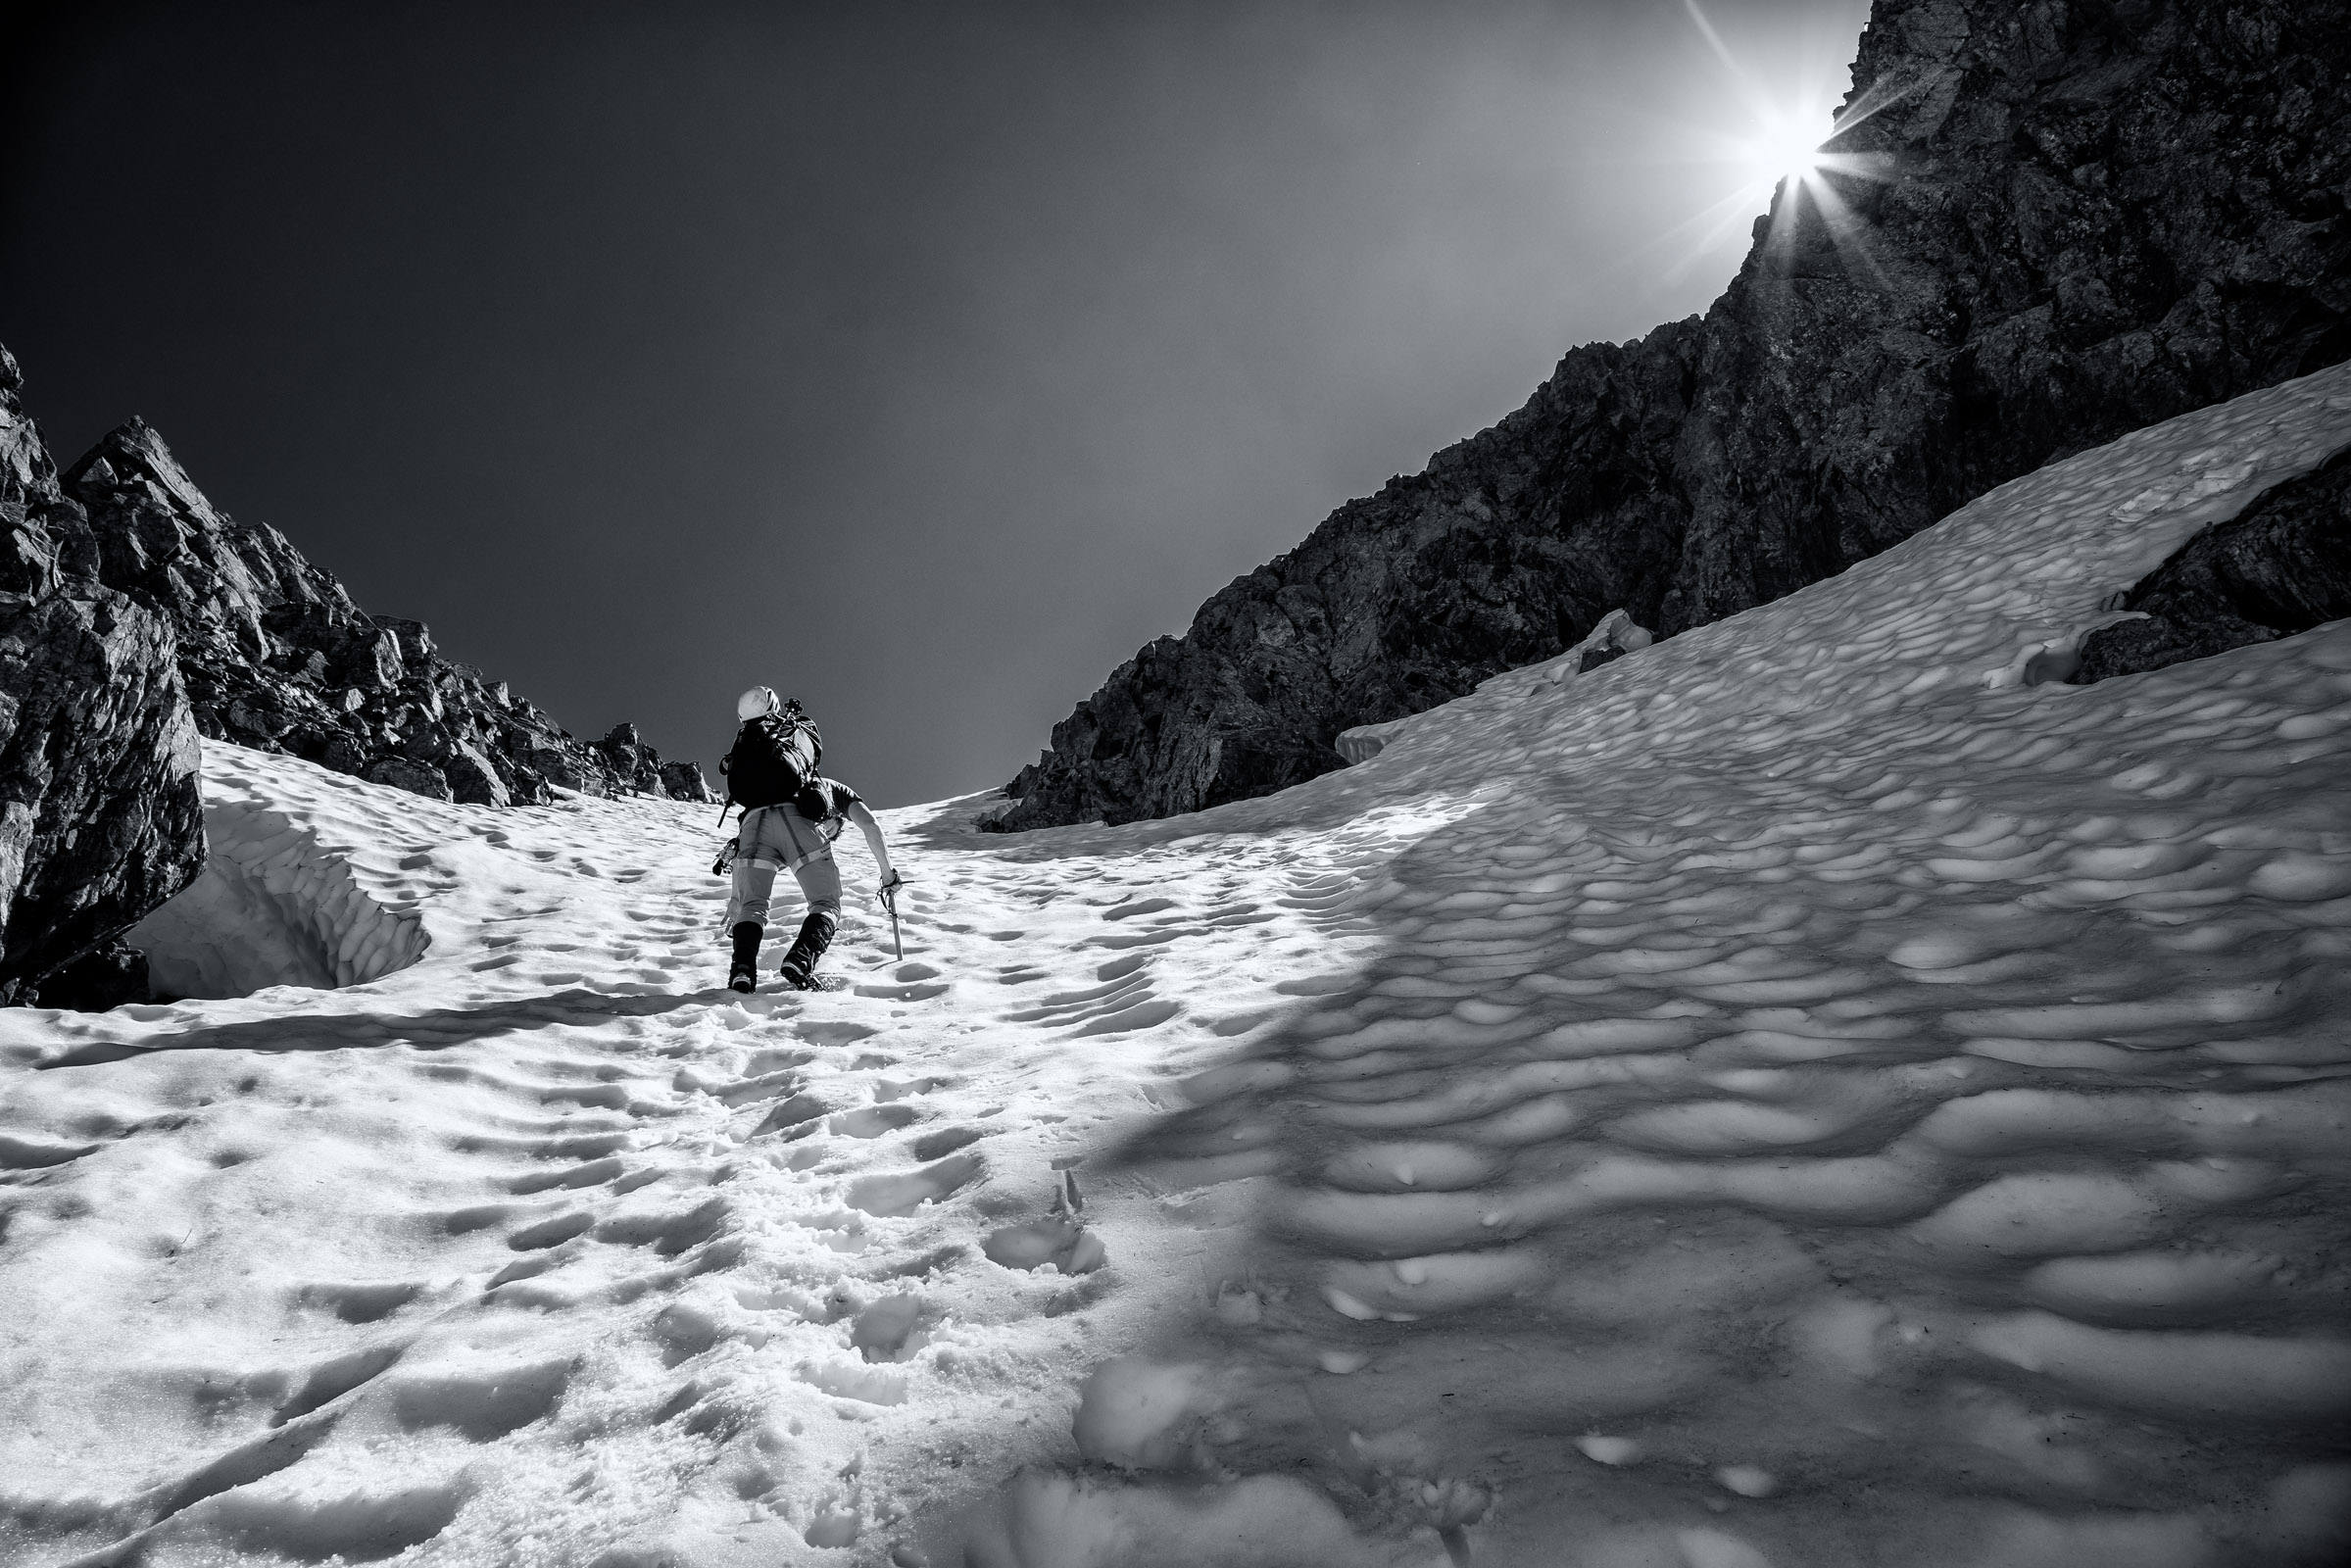  Adventures: Mountaineering and scenery of the Ptarmigan Traverse, a 35 mile alpine traverse in the North Cascades of Washington State 